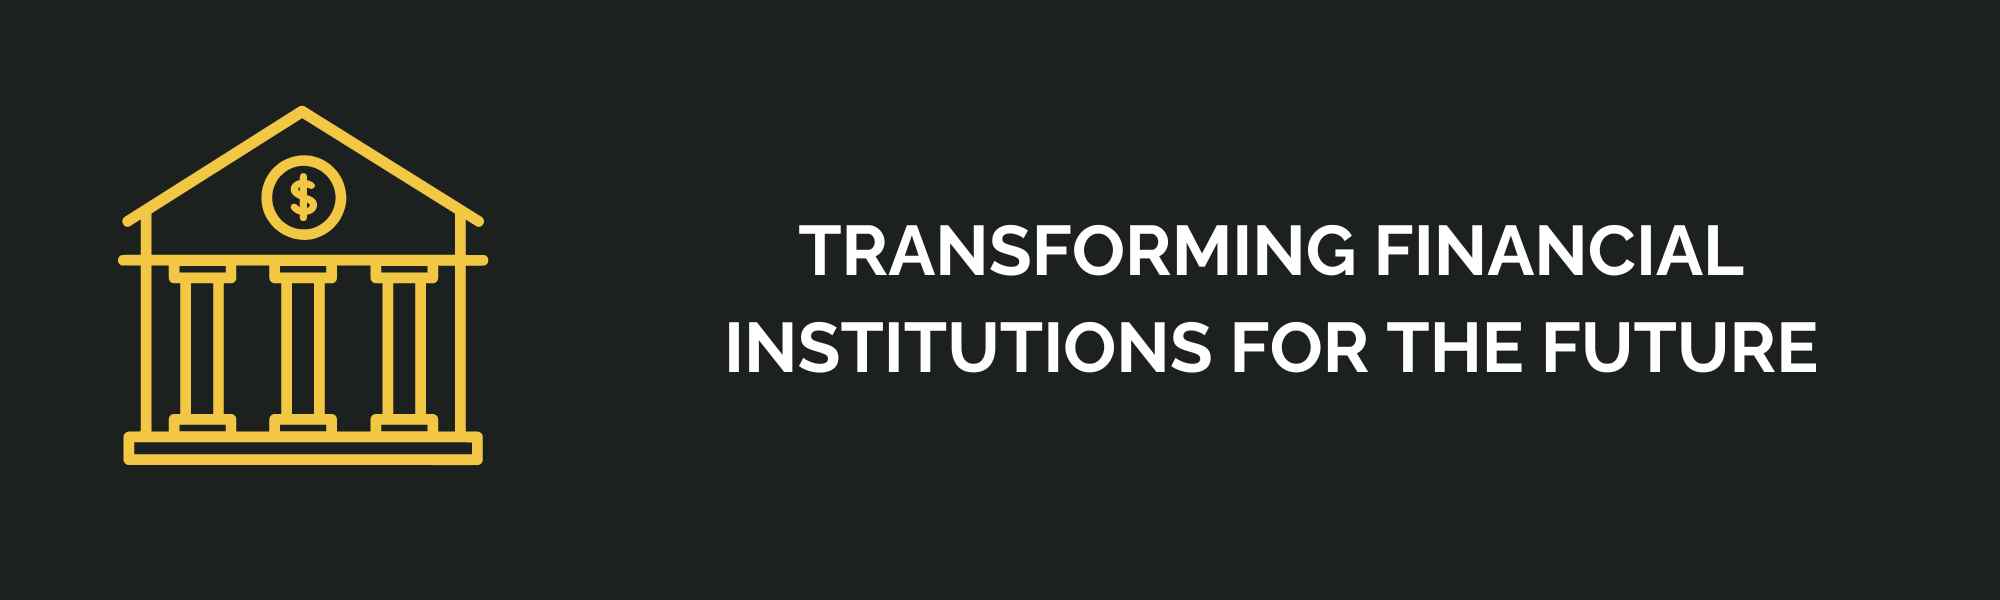 Transforming Financial Institutions for the Future (1)